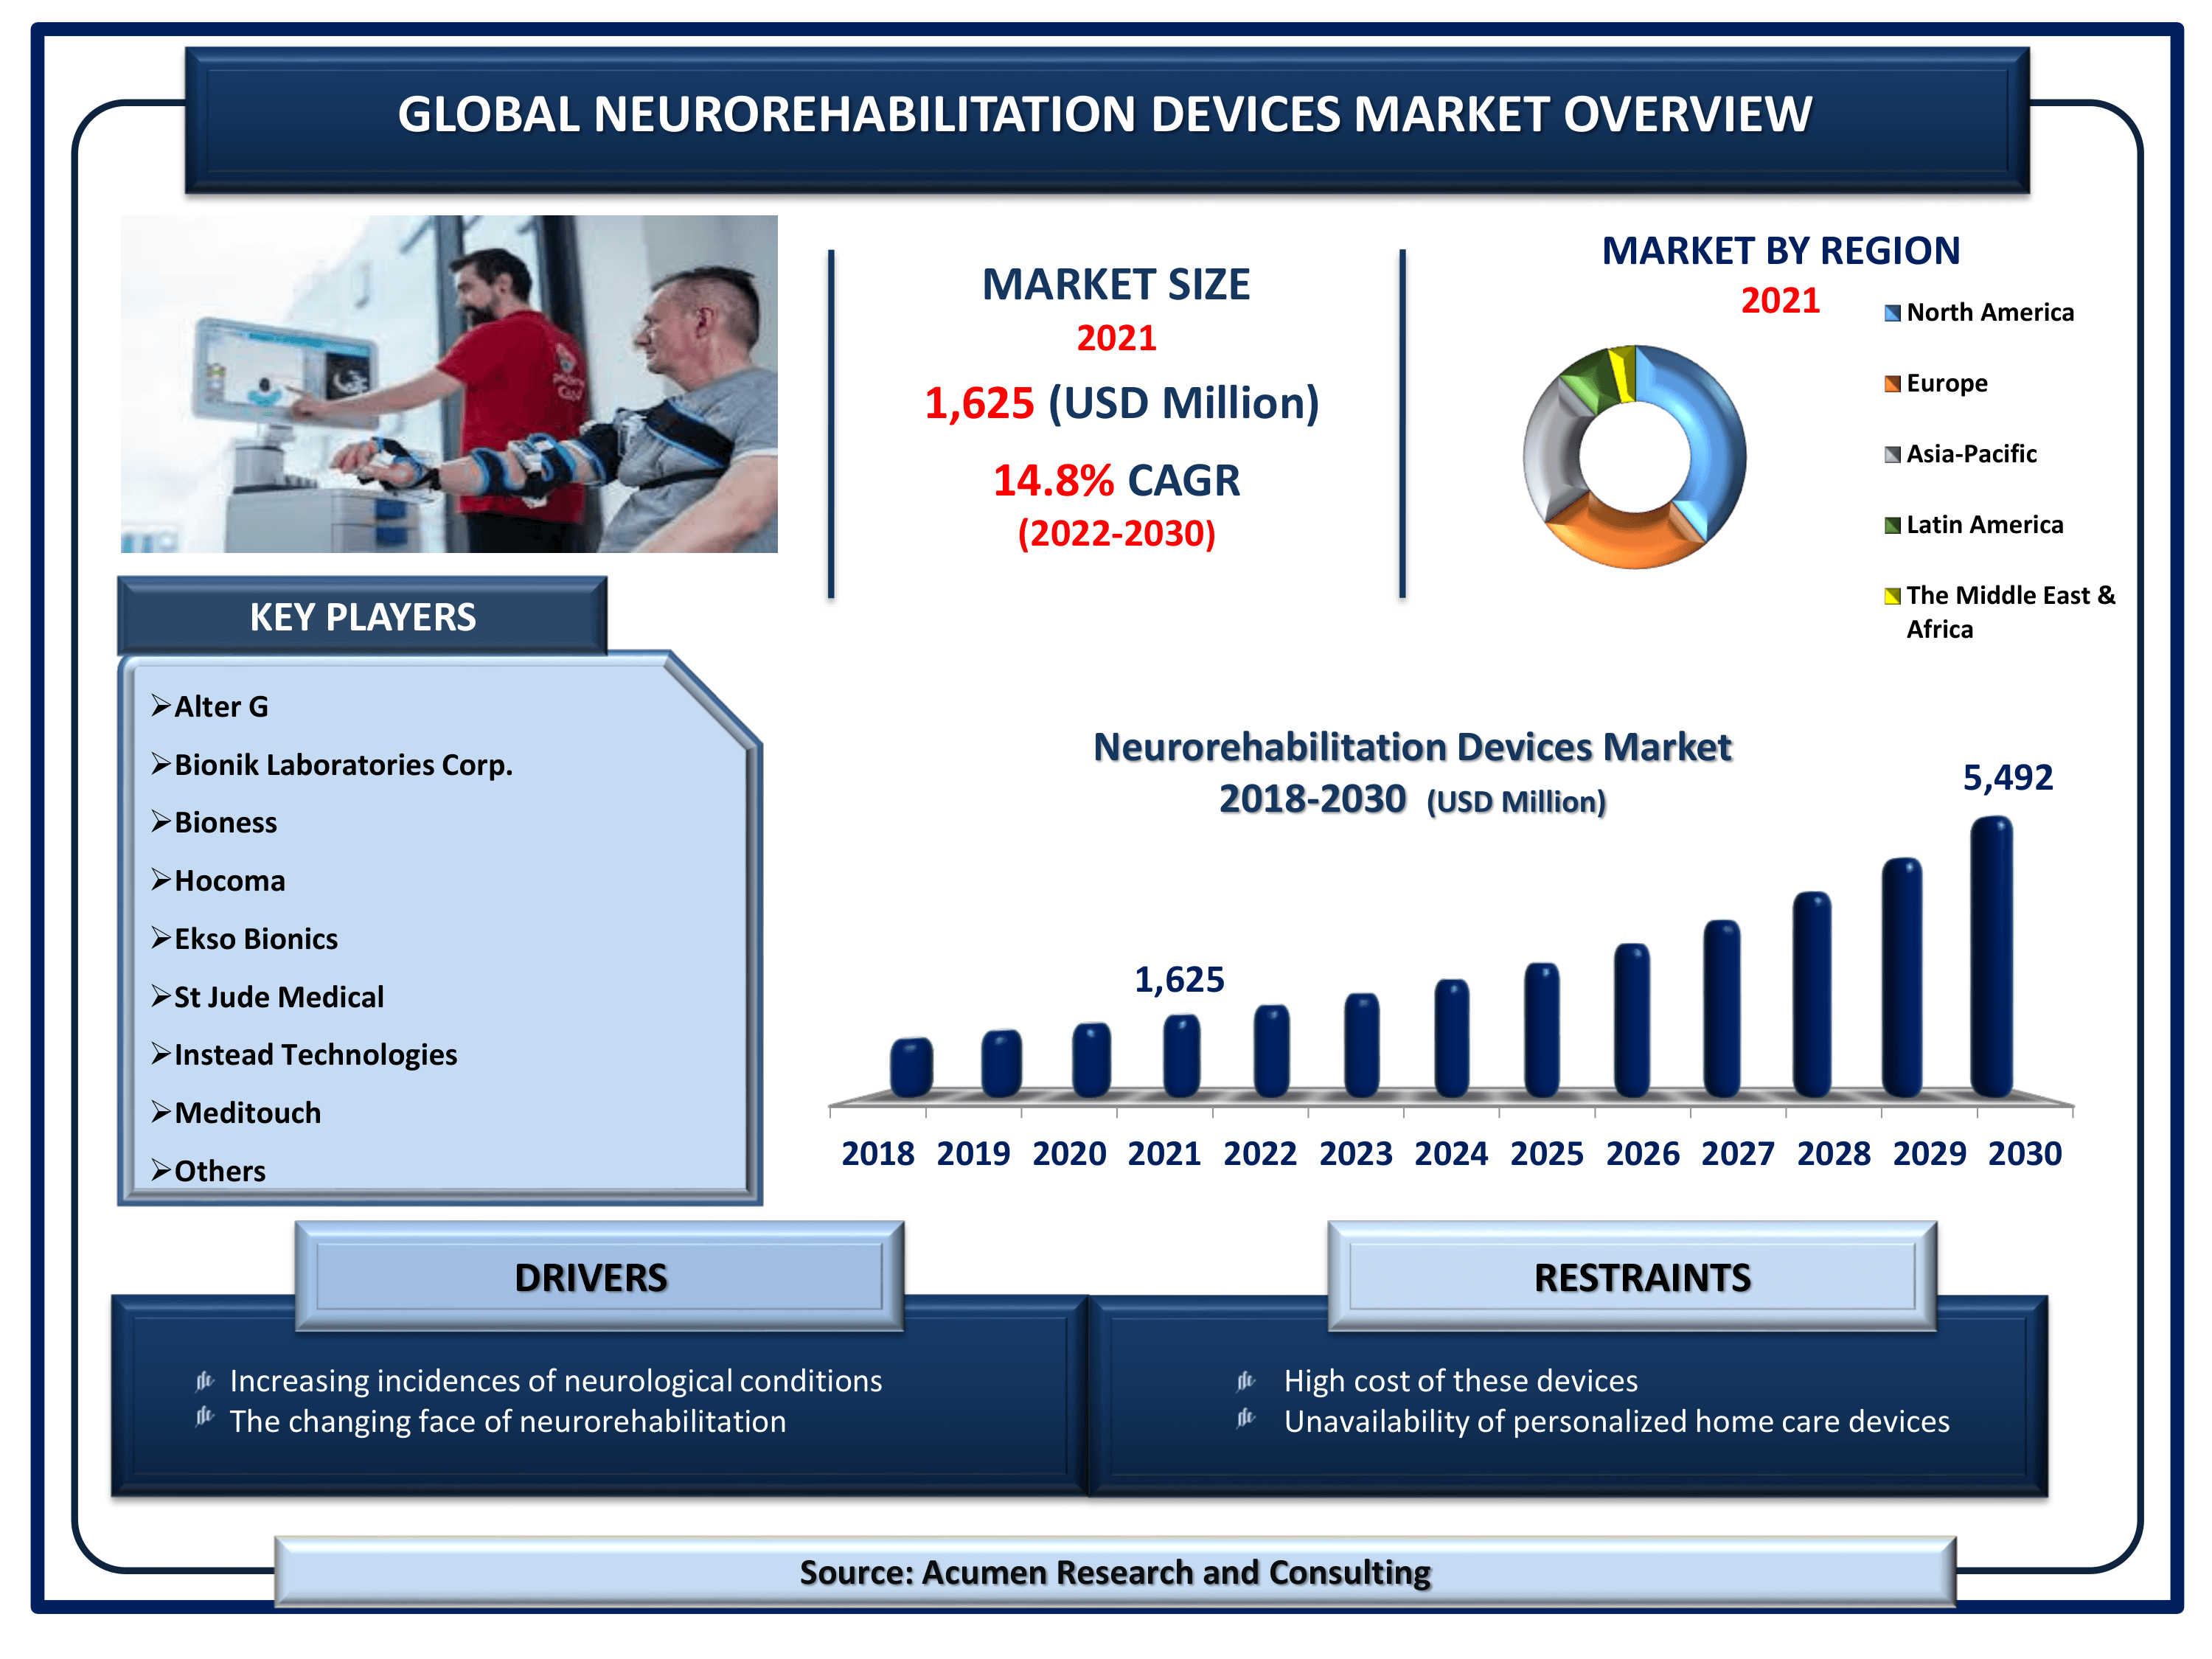 The Global Neurorehabilitation Device Market Size accounted for USD 1,625 Million in 2021 and is estimated to achieve a market size of USD 5,492 Million By 2030 growing at a CAGR of 14.8% from 2022 to 2030. 